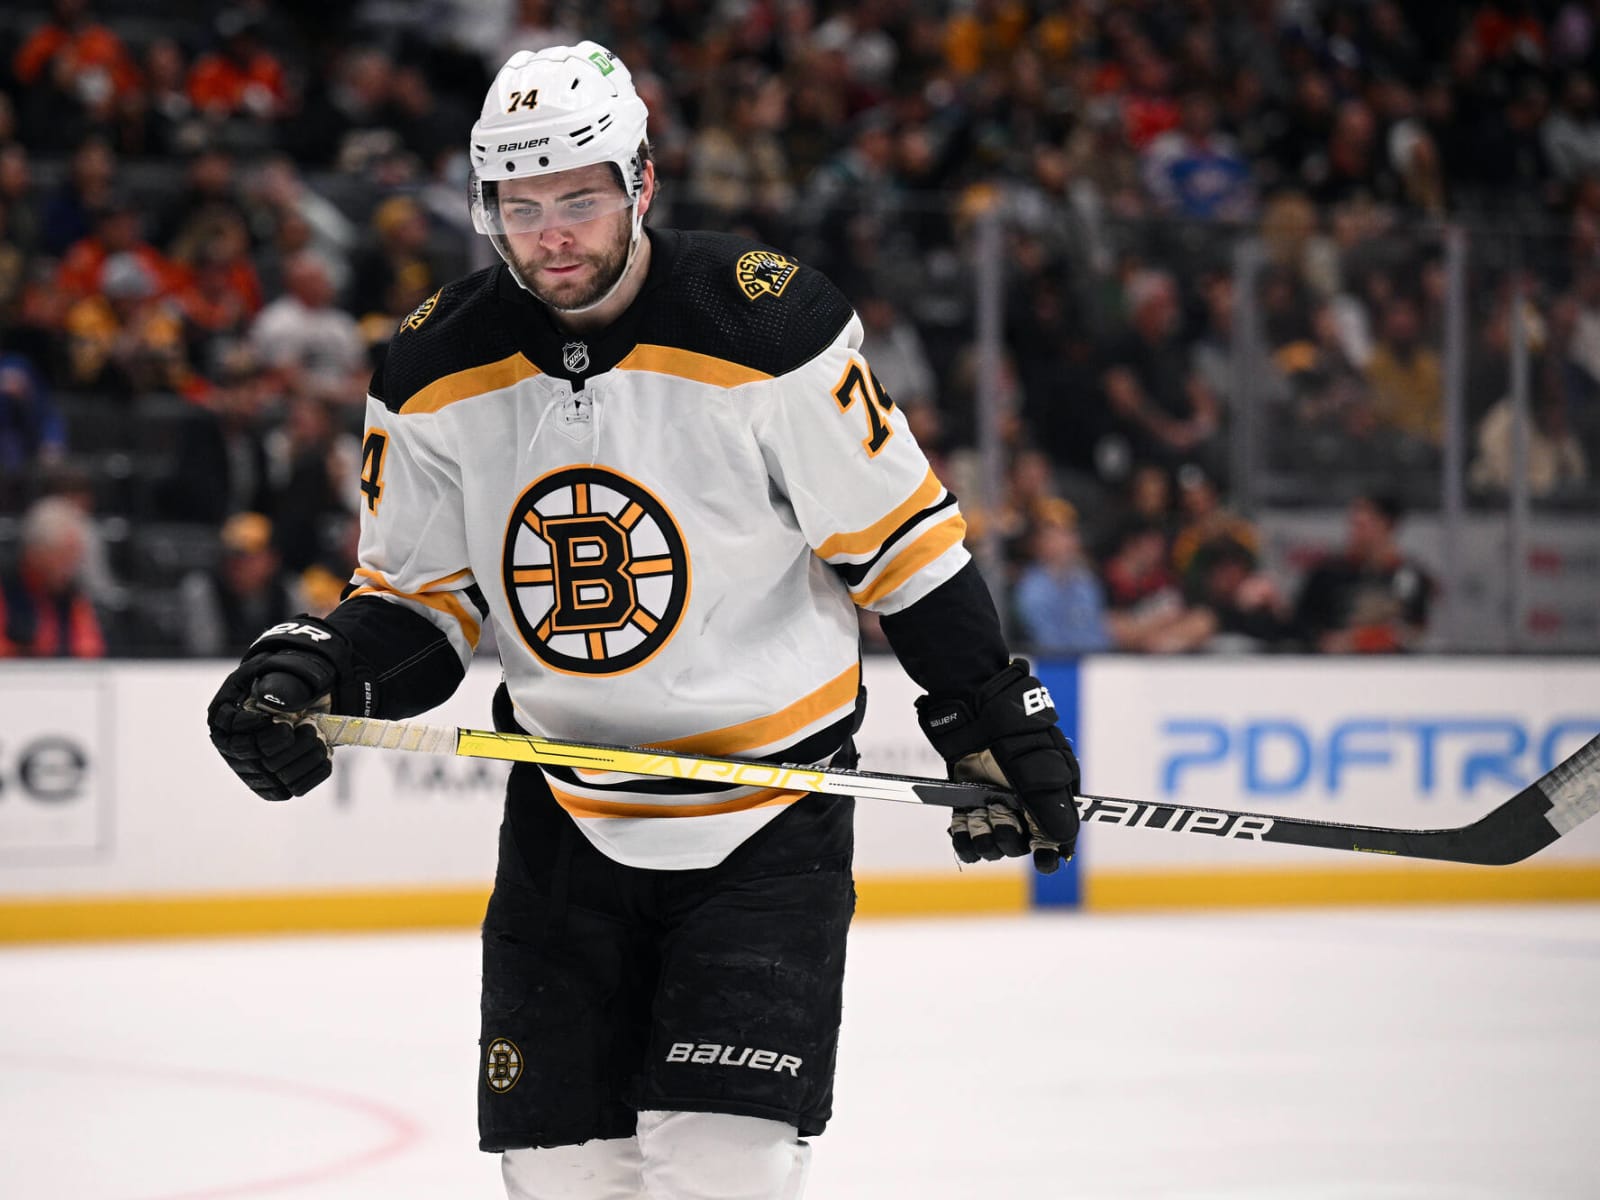 Bruins sign DeBrusk to 2-year deal with $3.675M AAV